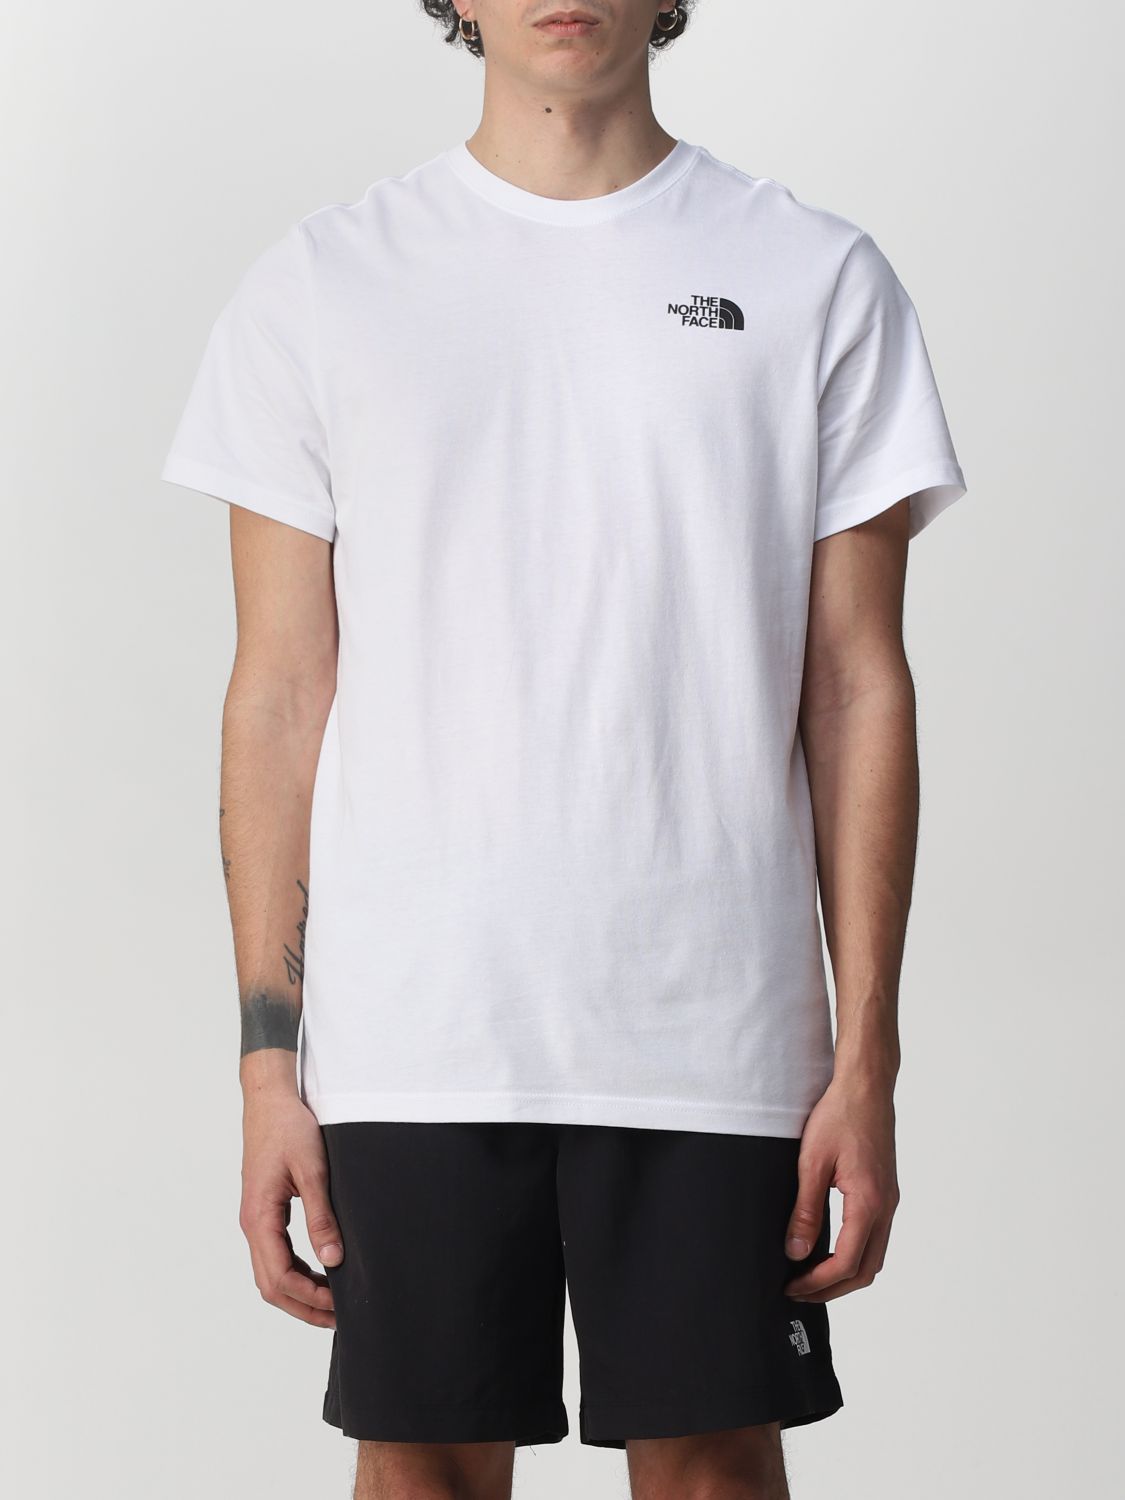 THE NORTH FACE: cotton t-shirt with logo - White | The North Face t ...